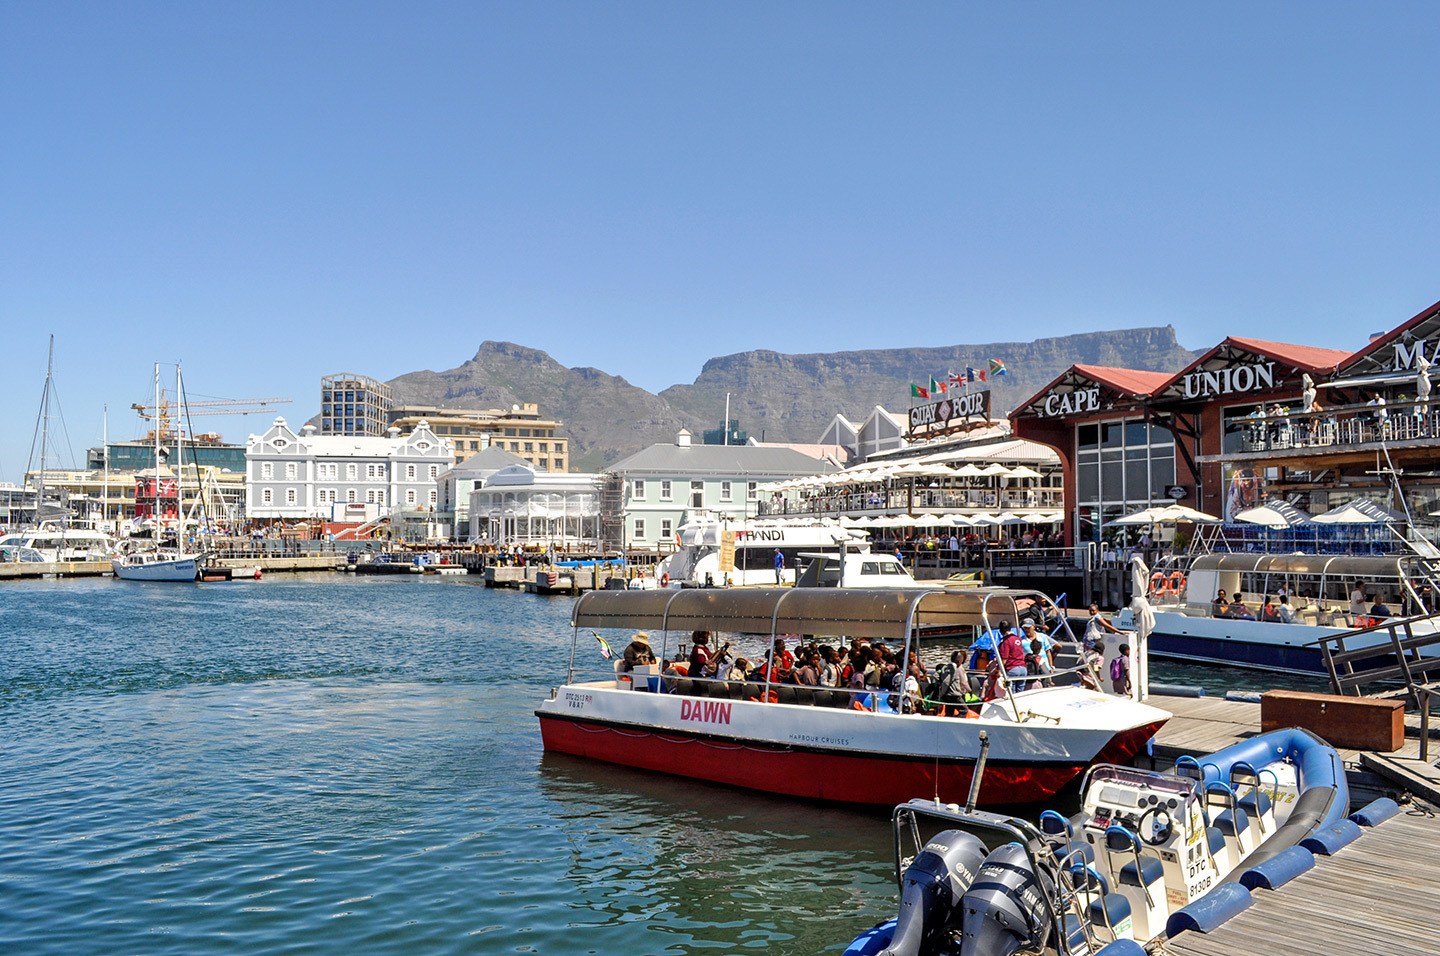 Boats in the harbour at the V&A Waterfront in Cape Town